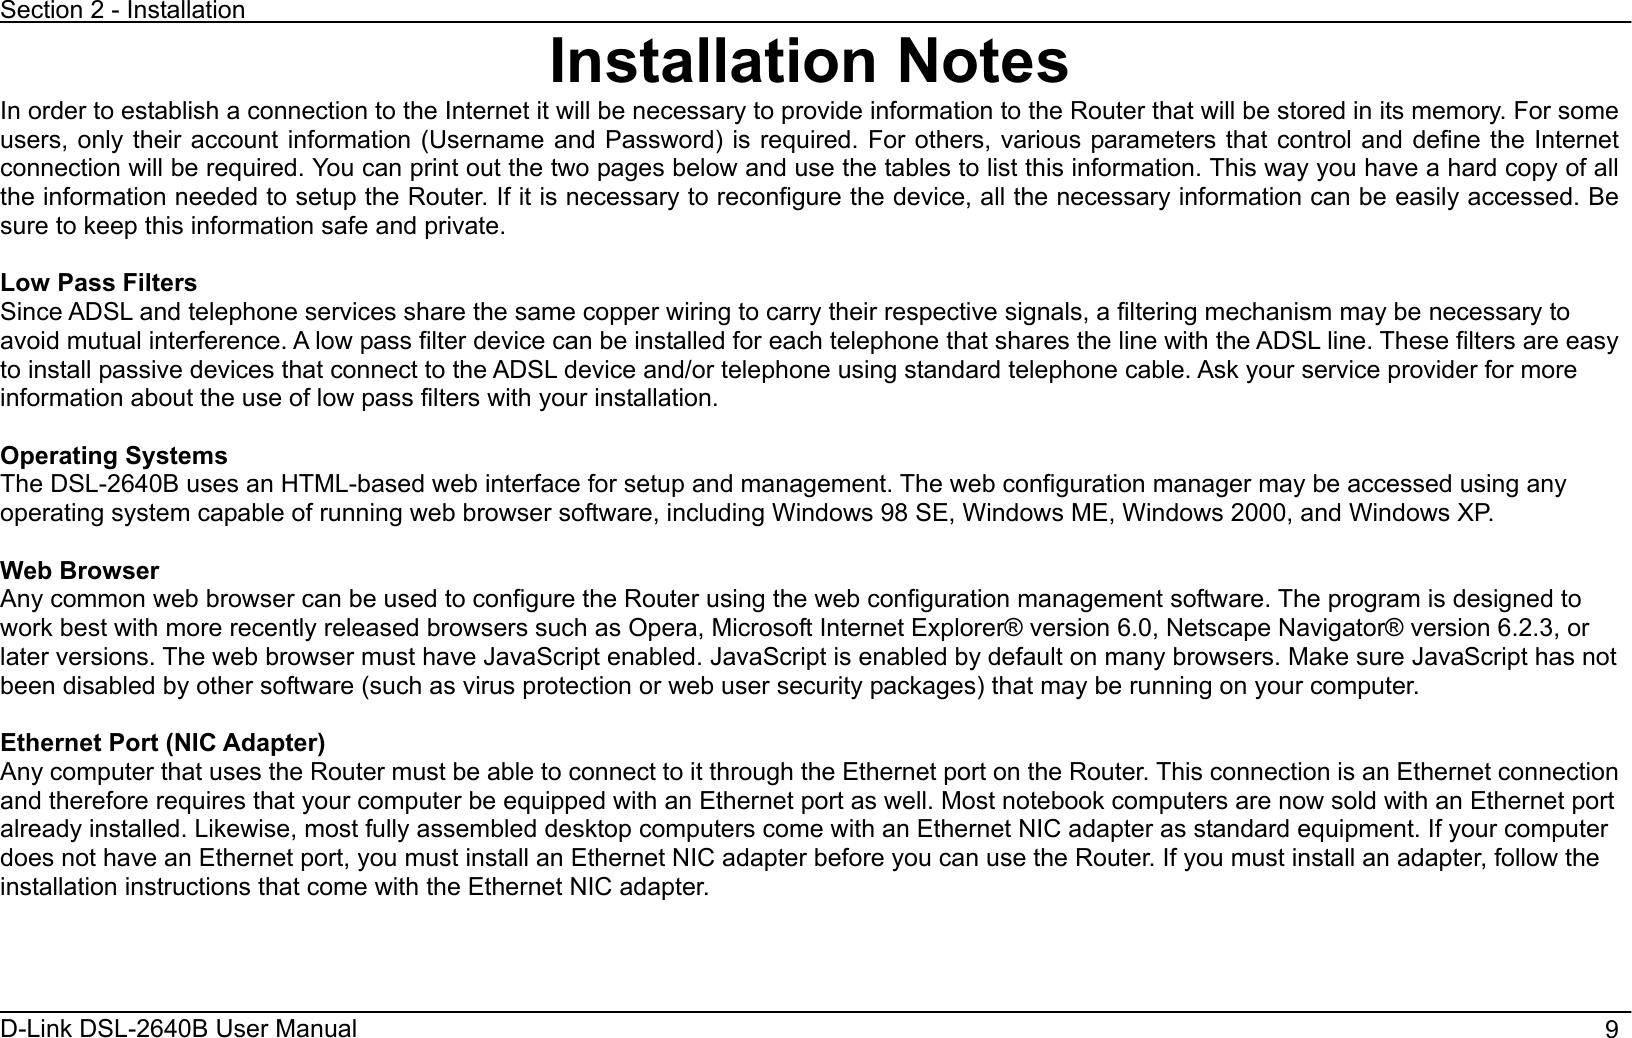 Section 2 - Installation D-Link DSL-2640B User Manual                                       9Installation Notes In order to establish a connection to the Internet it will be necessary to provide information to the Router that will be stored in its memory. For some users, only their account information (Username and Password) is required. For others, various parameters that control and define the Internet connection will be required. You can print out the two pages below and use the tables to list this information. This way you have a hard copy of all the information needed to setup the Router. If it is necessary to reconfigure the device, all the necessary information can be easily accessed. Be sure to keep this information safe and private. Low Pass Filters Since ADSL and telephone services share the same copper wiring to carry their respective signals, a filtering mechanism may be necessary to avoid mutual interference. A low pass filter device can be installed for each telephone that shares the line with the ADSL line. These filters are easy to install passive devices that connect to the ADSL device and/or telephone using standard telephone cable. Ask your service provider for more information about the use of low pass filters with your installation.   Operating Systems The DSL-2640B uses an HTML-based web interface for setup and management. The web configuration manager may be accessed using anyoperating system capable of running web browser software, including Windows 98 SE, Windows ME, Windows 2000, and Windows XP.   Web Browser Any common web browser can be used to configure the Router using the web configuration management software. The program is designed to work best with more recently released browsers such as Opera, Microsoft Internet Explorer® version 6.0, Netscape Navigator® version 6.2.3, or later versions. The web browser must have JavaScript enabled. JavaScript is enabled by default on many browsers. Make sure JavaScript has not been disabled by other software (such as virus protection or web user security packages) that may be running on your computer. Ethernet Port (NIC Adapter) Any computer that uses the Router must be able to connect to it through the Ethernet port on the Router. This connection is an Ethernet connection and therefore requires that your computer be equipped with an Ethernet port as well. Most notebook computers are now sold with an Ethernet port already installed. Likewise, most fully assembled desktop computers come with an Ethernet NIC adapter as standard equipment. If your computer does not have an Ethernet port, you must install an Ethernet NIC adapter before you can use the Router. If you must install an adapter, follow the installation instructions that come with the Ethernet NIC adapter.   